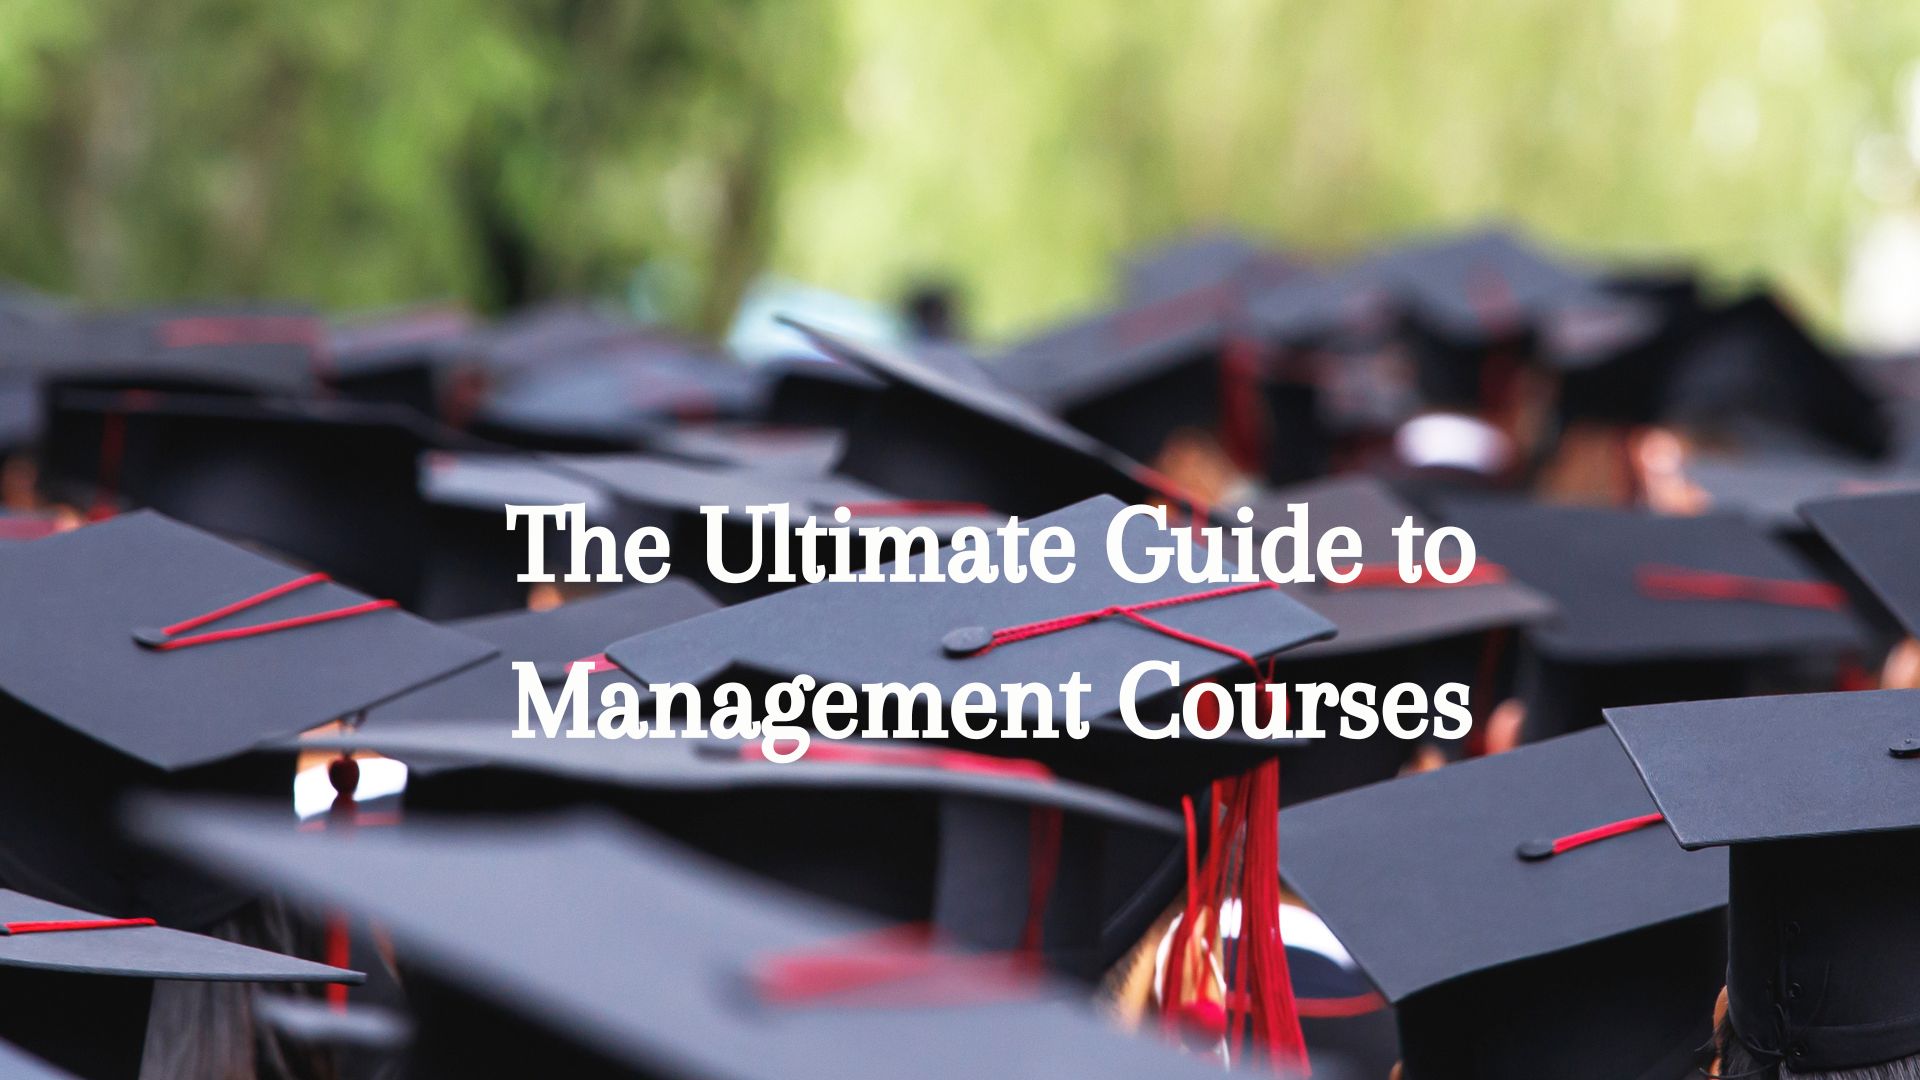 The Ultimate Guide to Management Courses